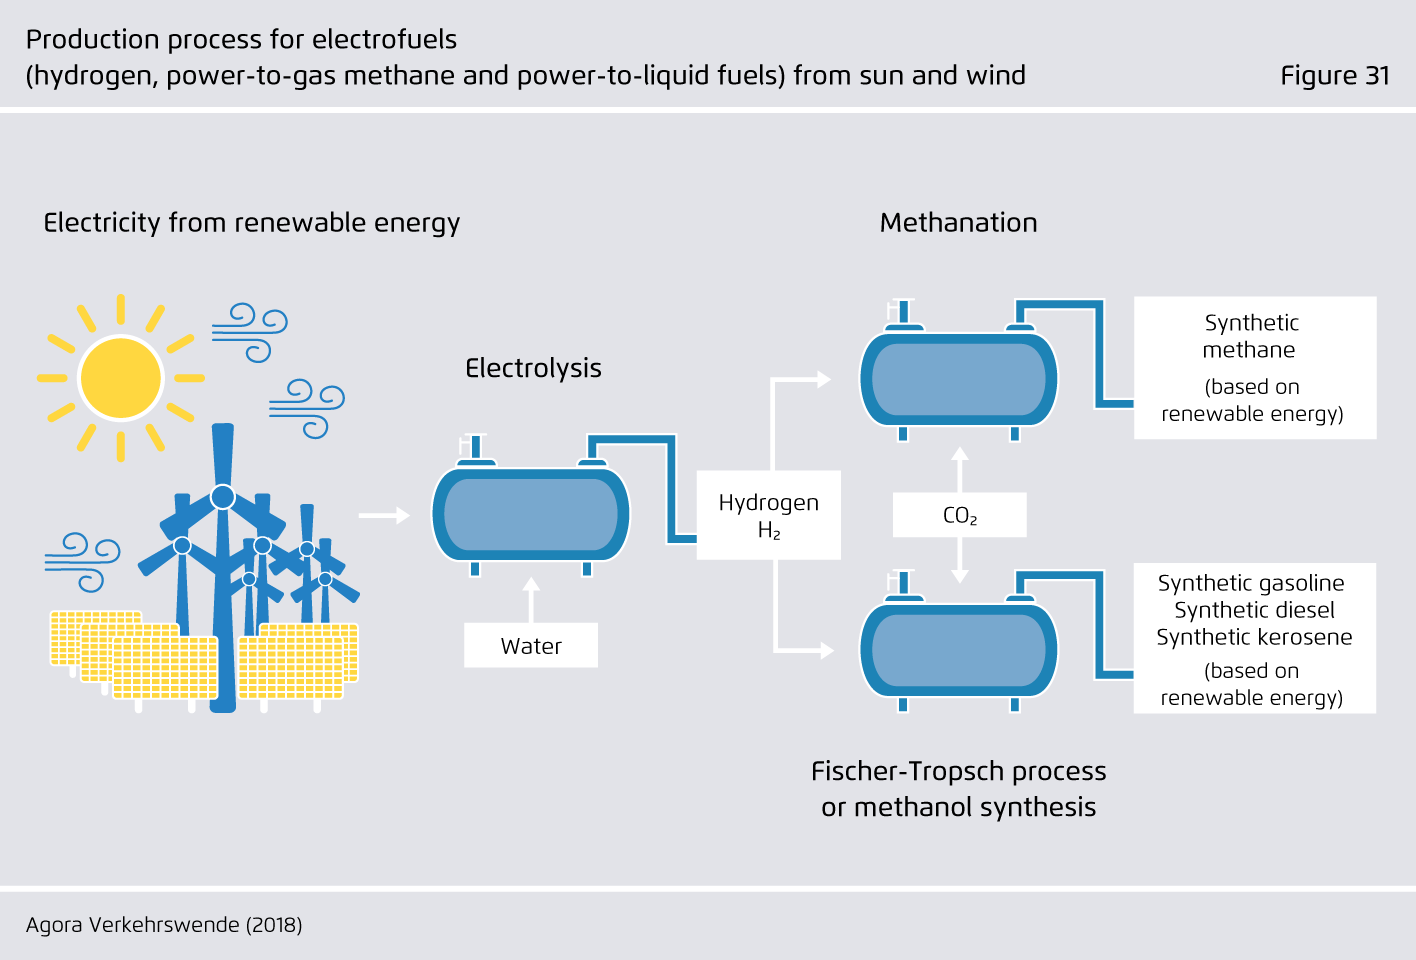 Preview for Production process for electrofuels (hydrogen, PtG methane and PtL fuels) from sun and wind